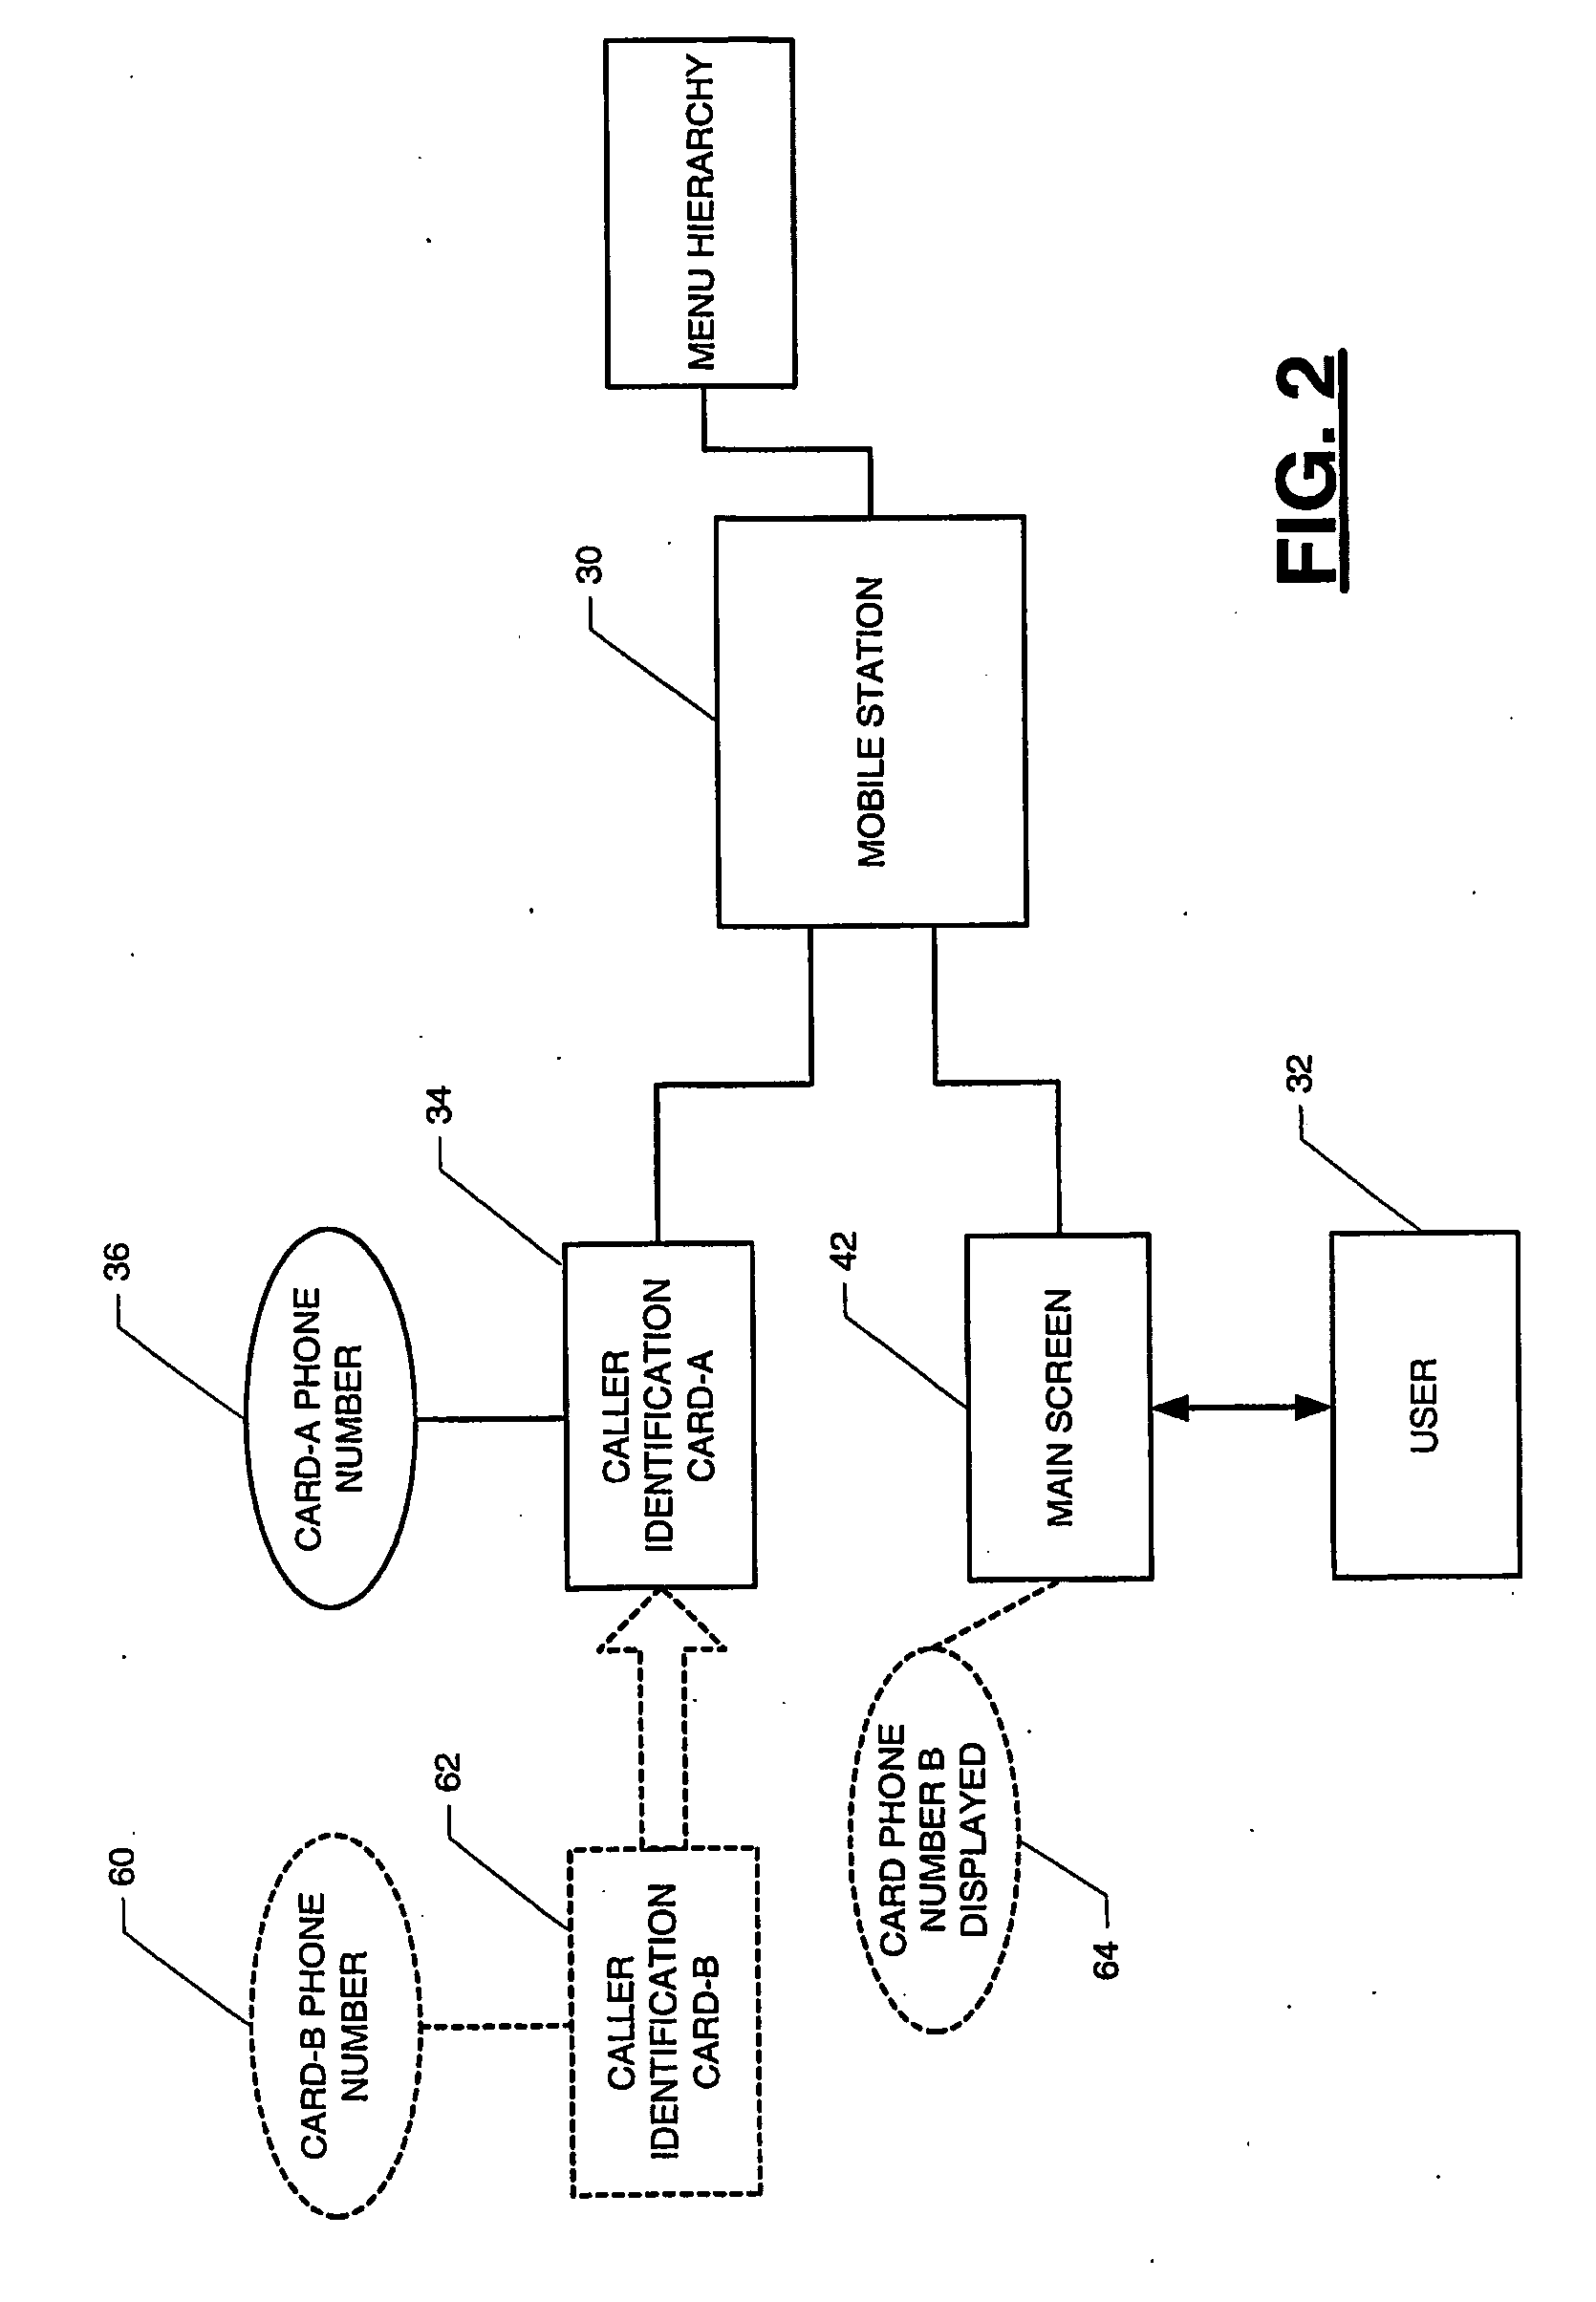 Advanced user interface operations in a dual-mode wireless device